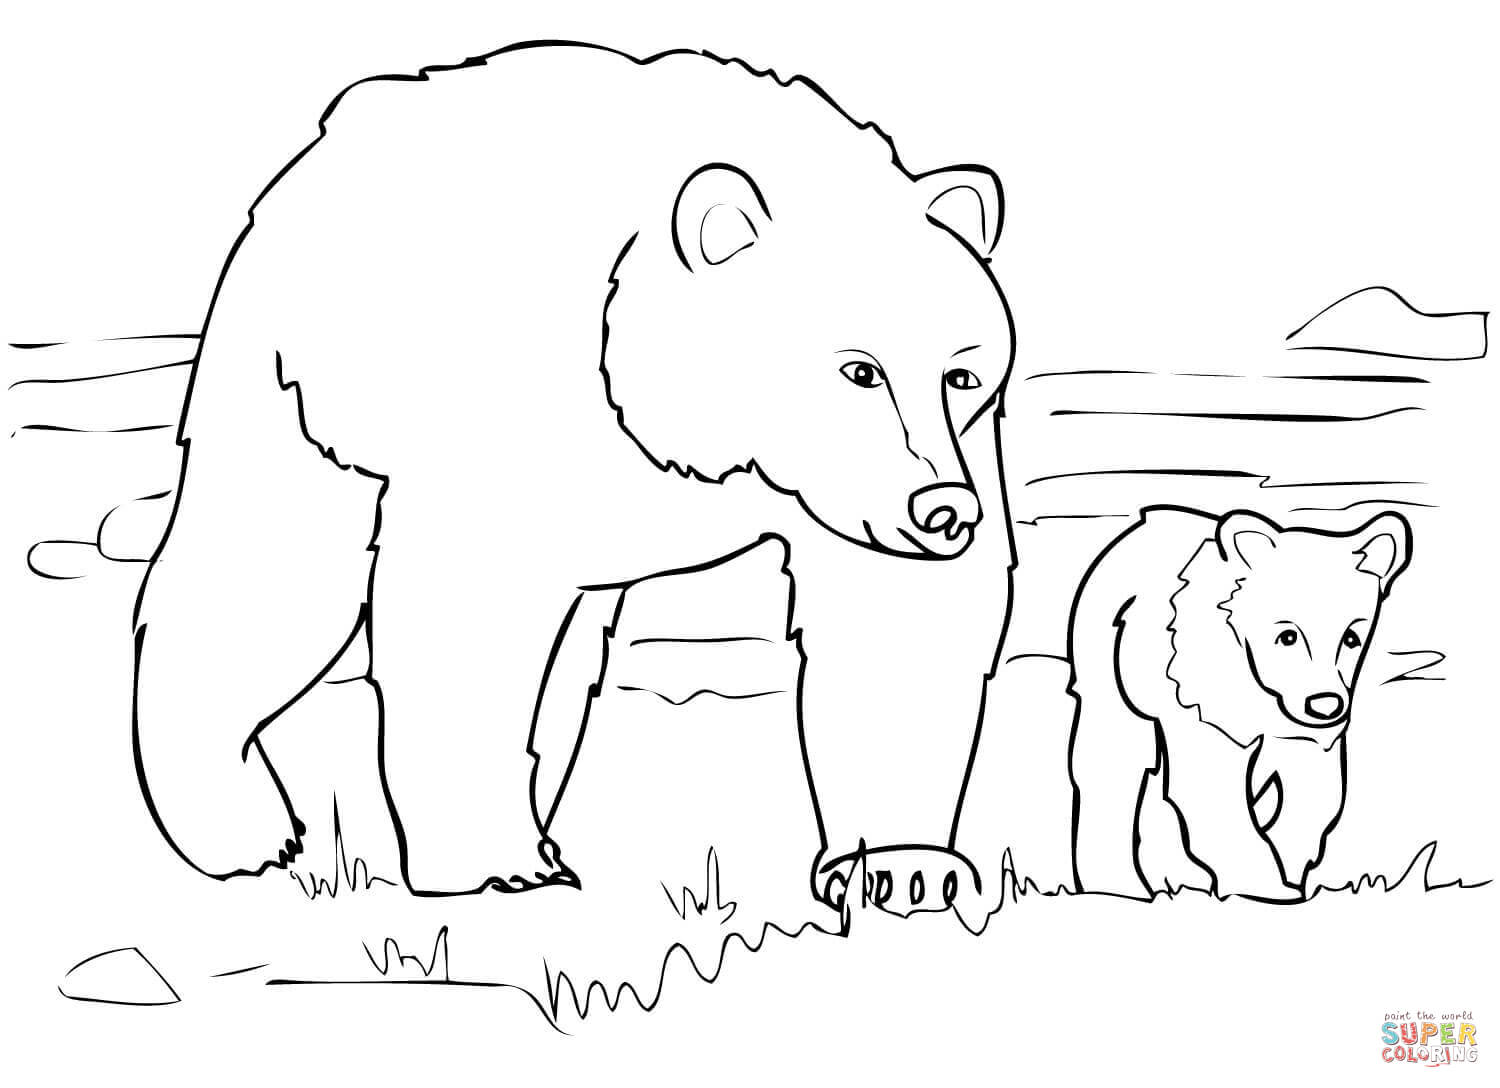 Grizzly bears coloring pages | Free Coloring Pages